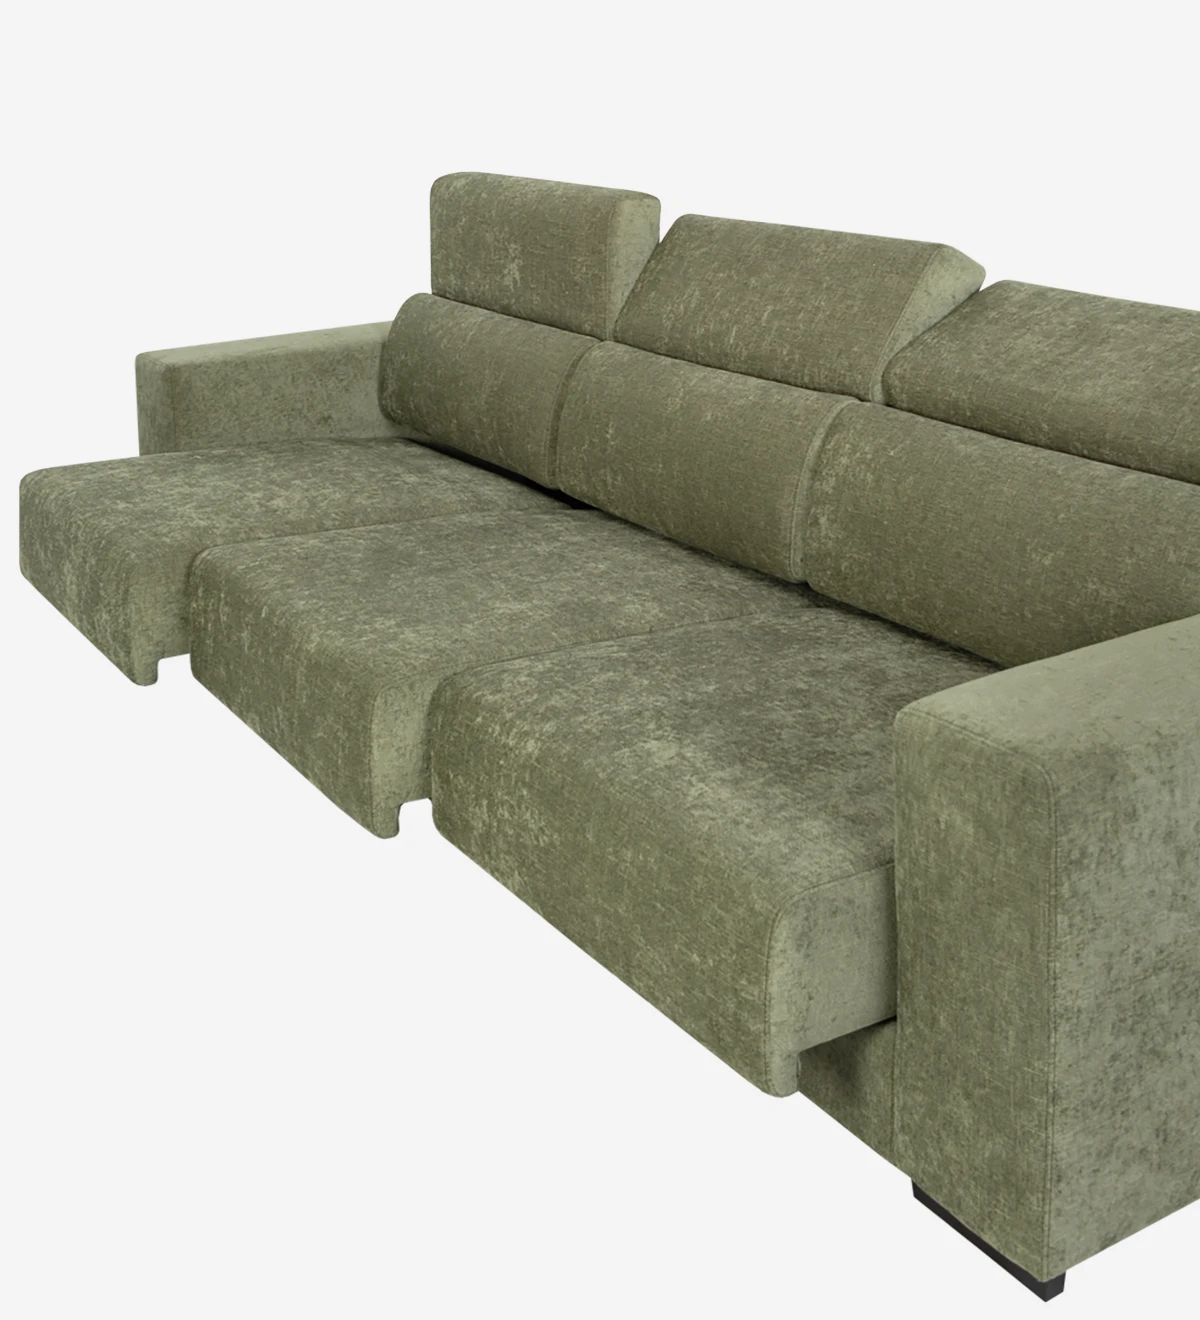 3 seater, fabric upholstered, with reclining headrests and sliding seats.